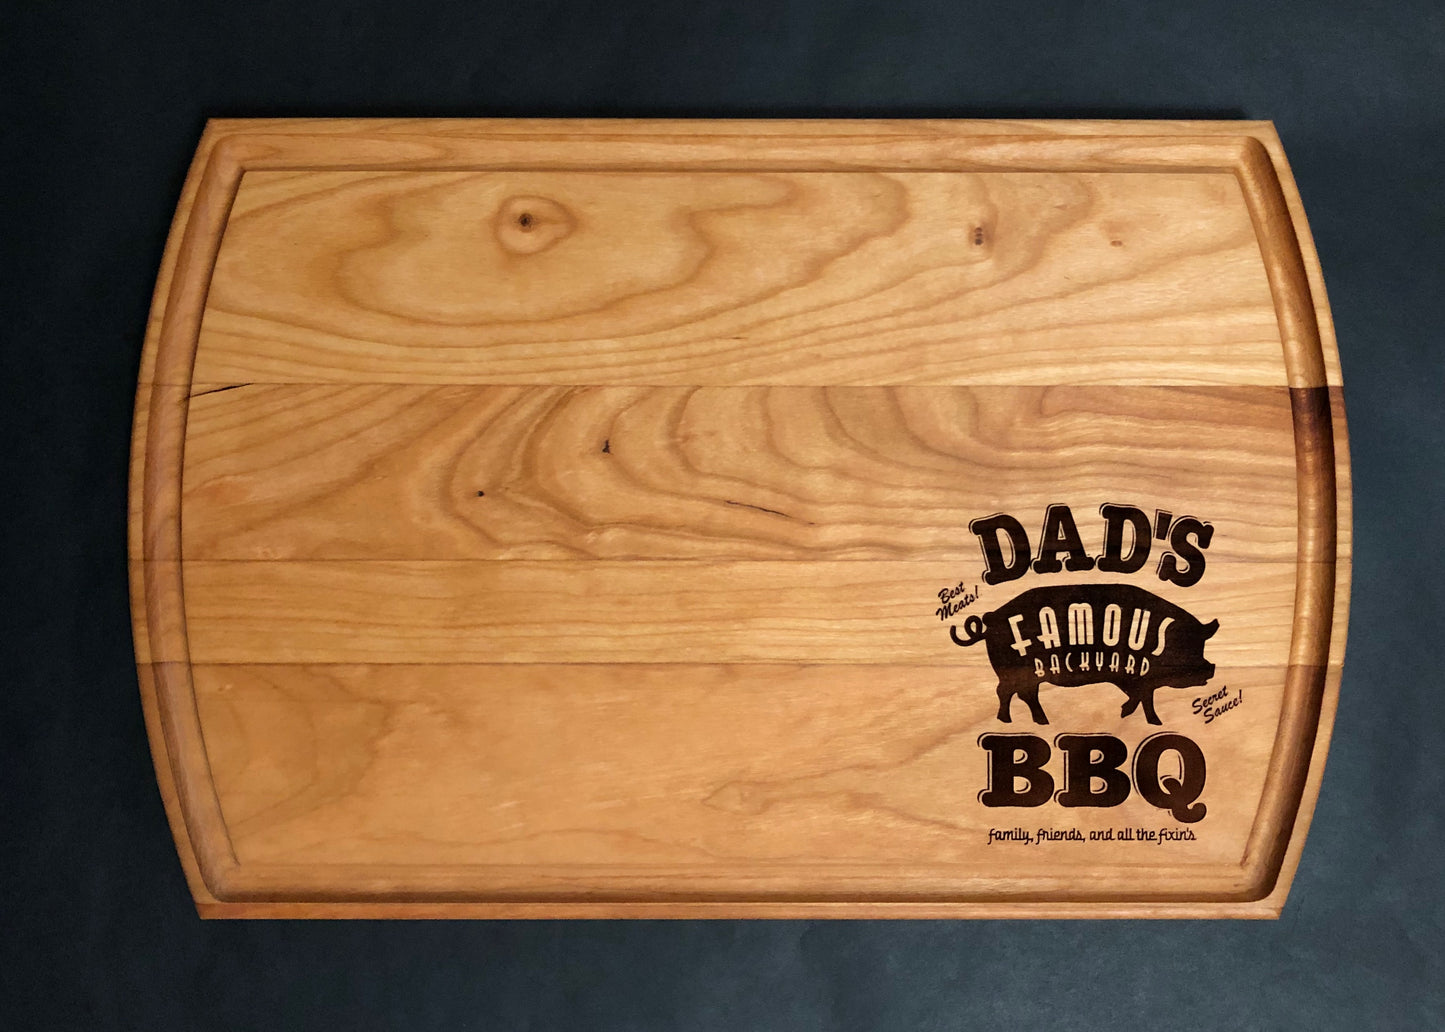 Dad's BBQ Cutting Board featuring a Pig, Makes a Great Dad's Birthday Present or Father's Day Gift